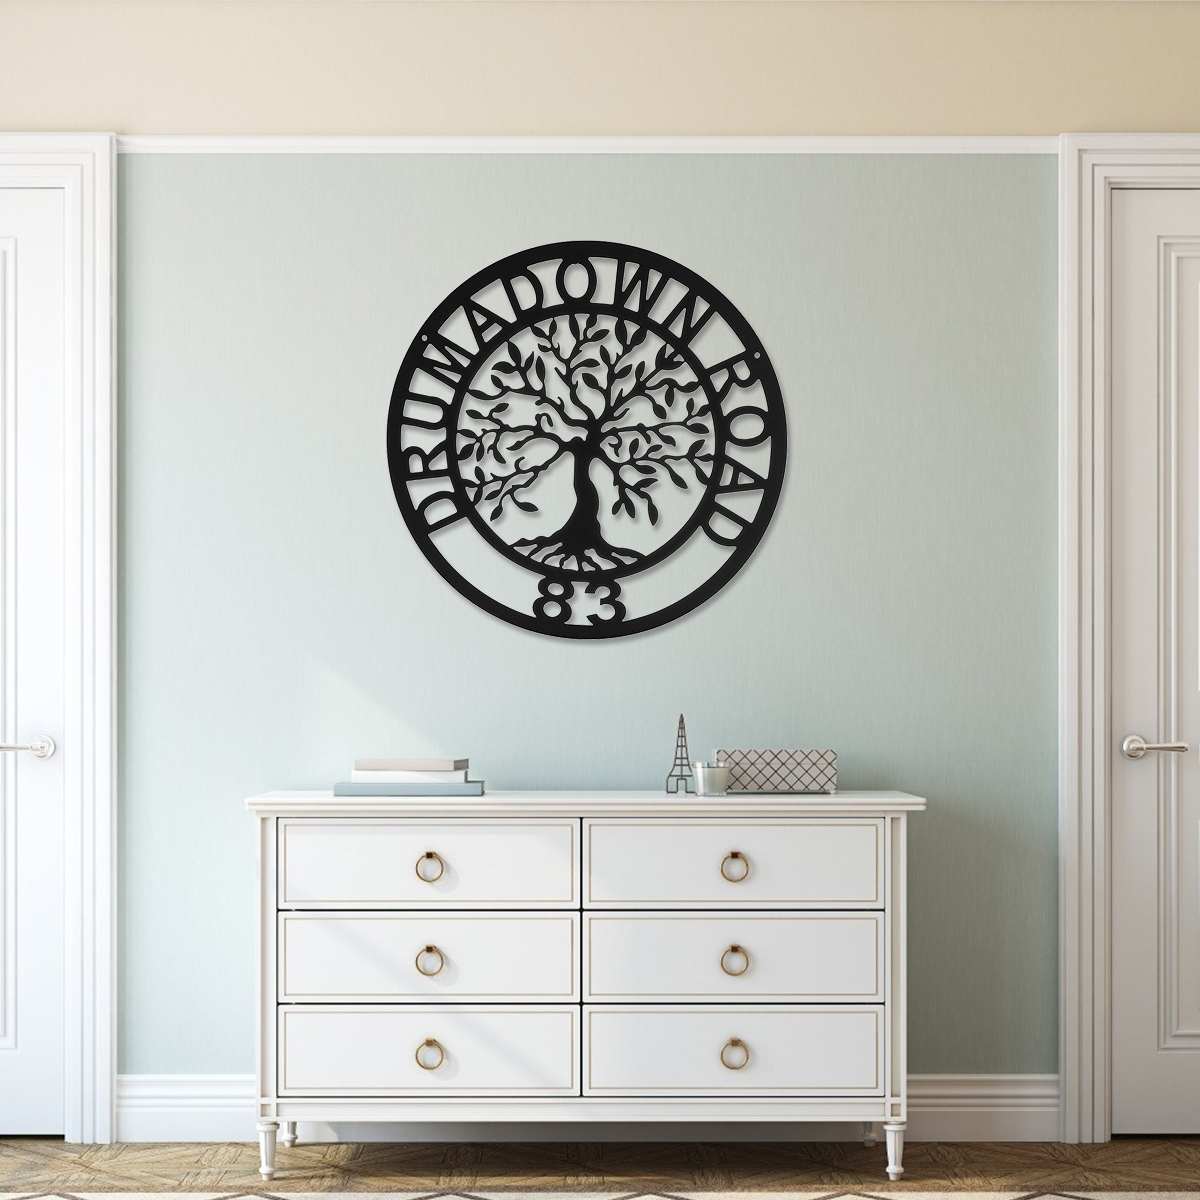 Tree of Life Family Tree Sign Wall Silhouette Wood Wall Decor Home Office Decoration Bedroom Living Room Decor Sculpture